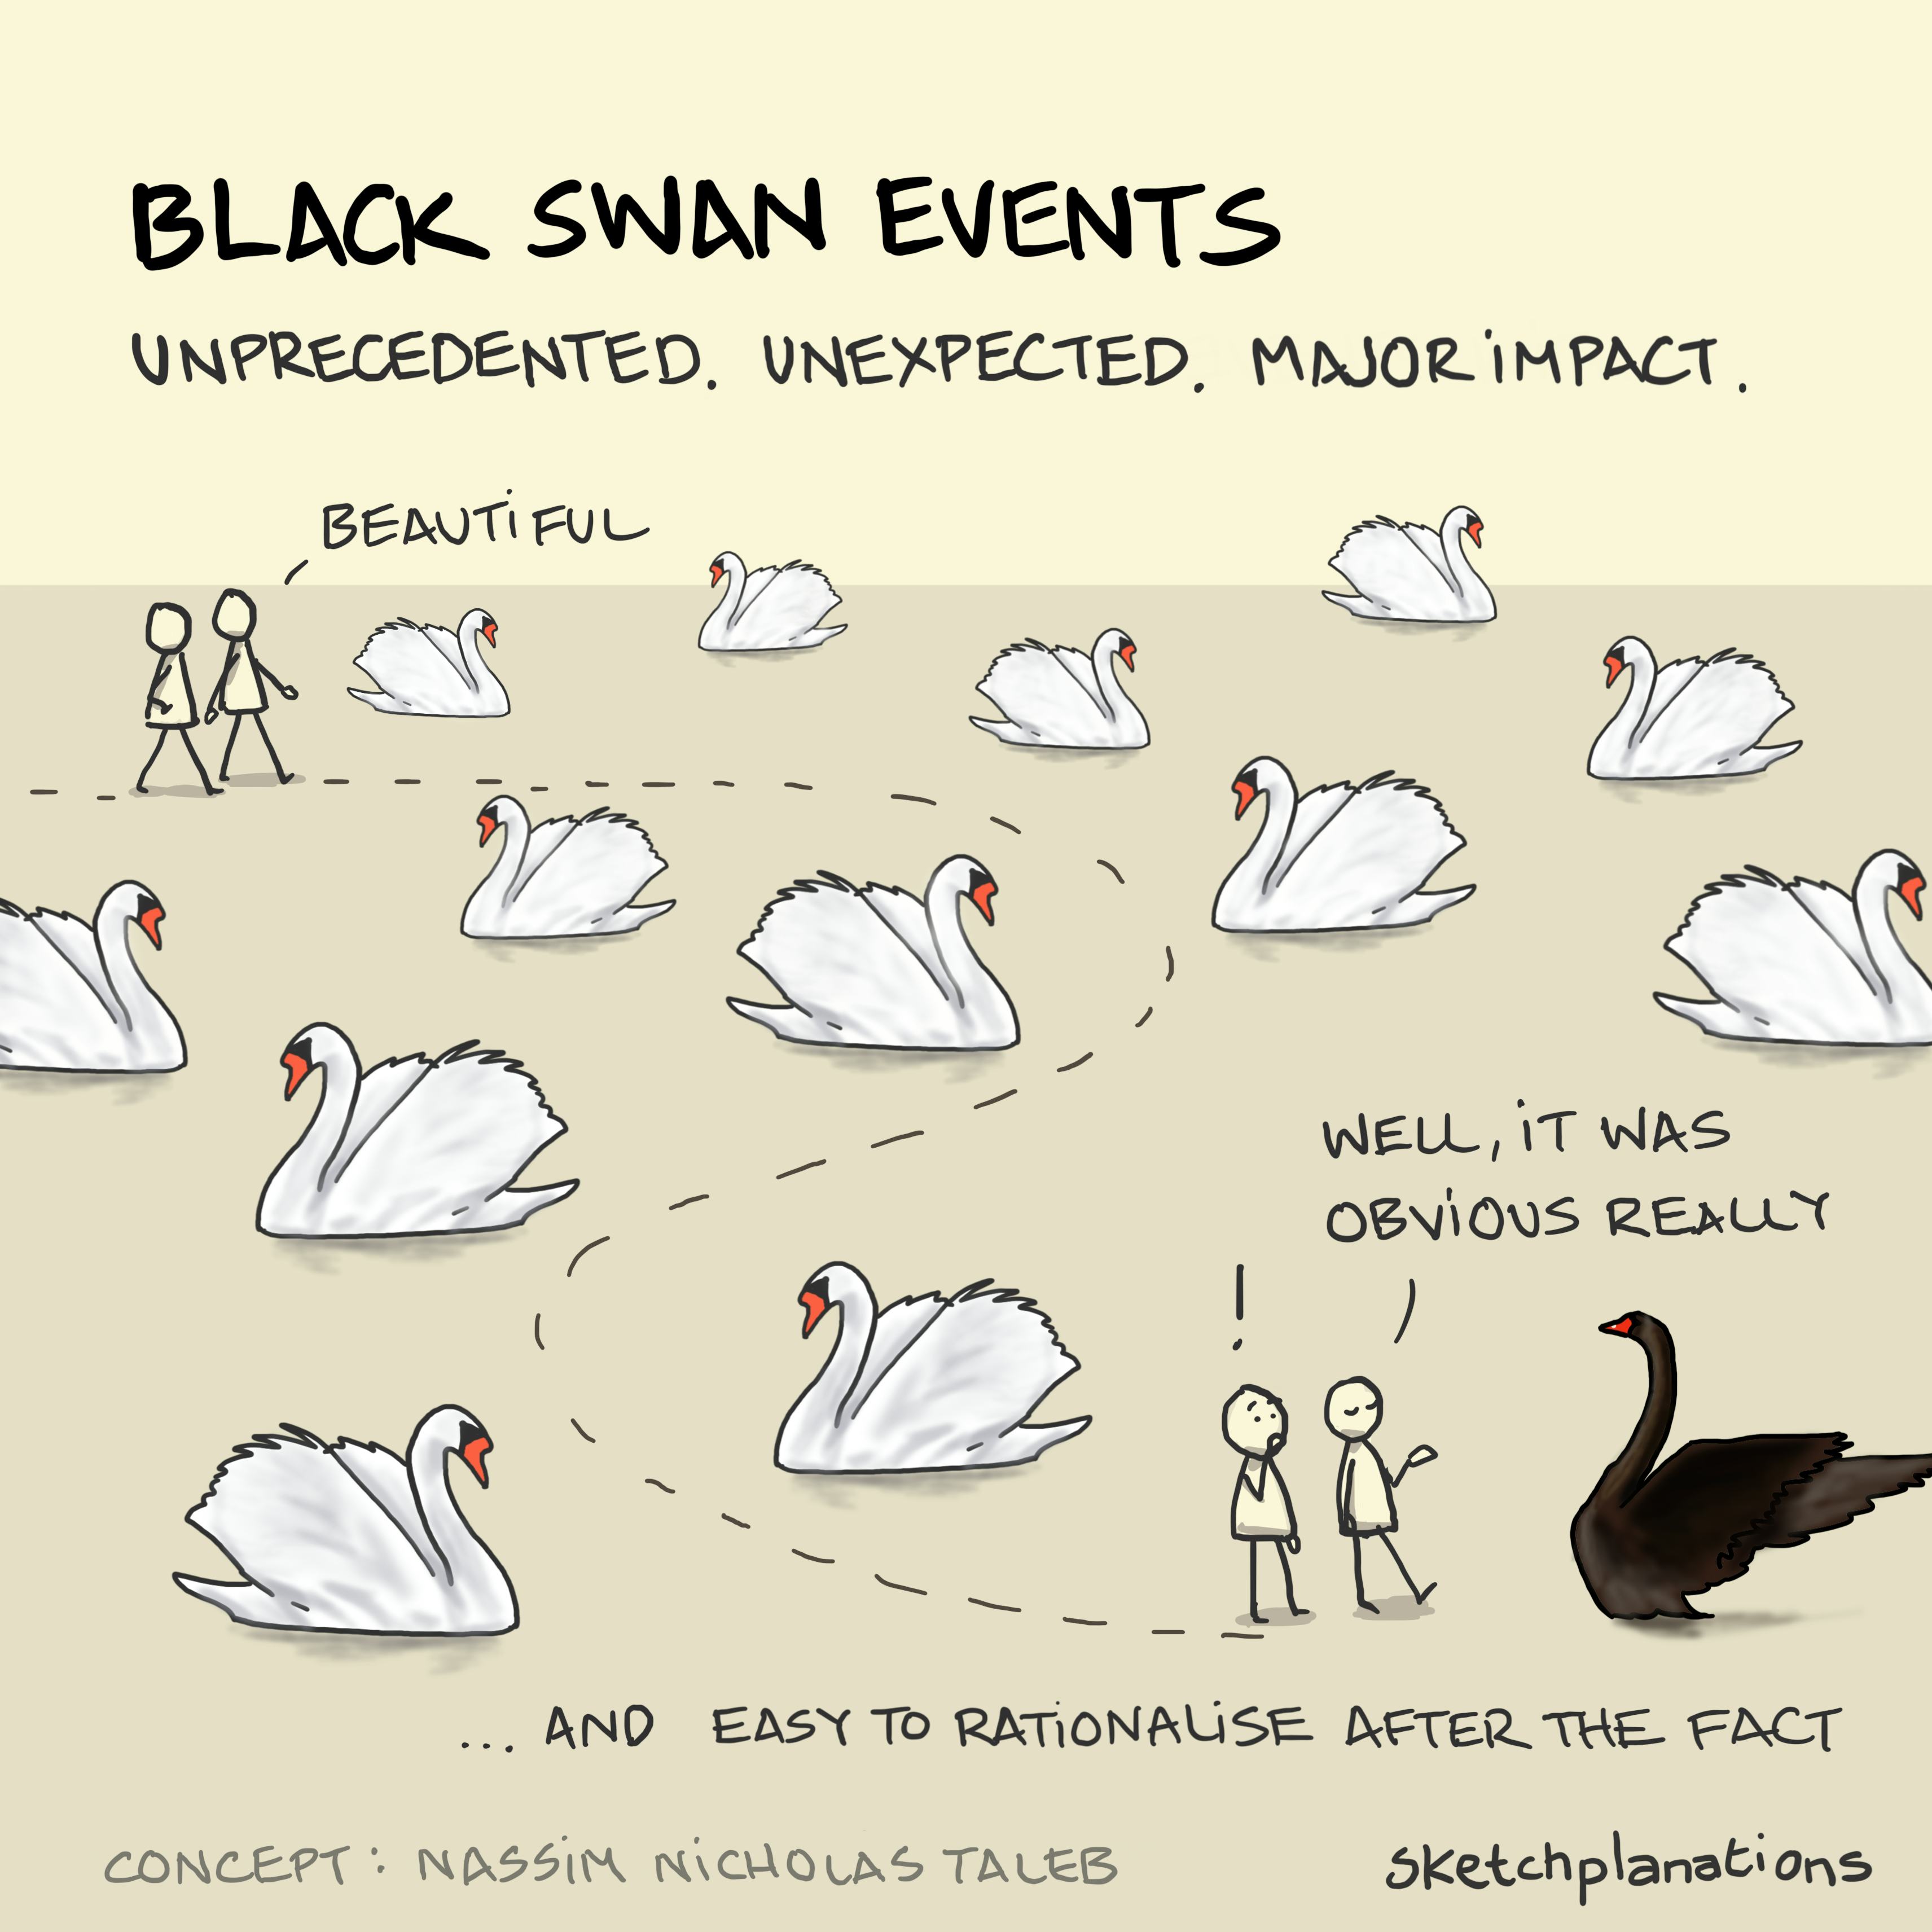 Two people walk through many white swans before bumping into a black swan. One claims it was obvious all along.